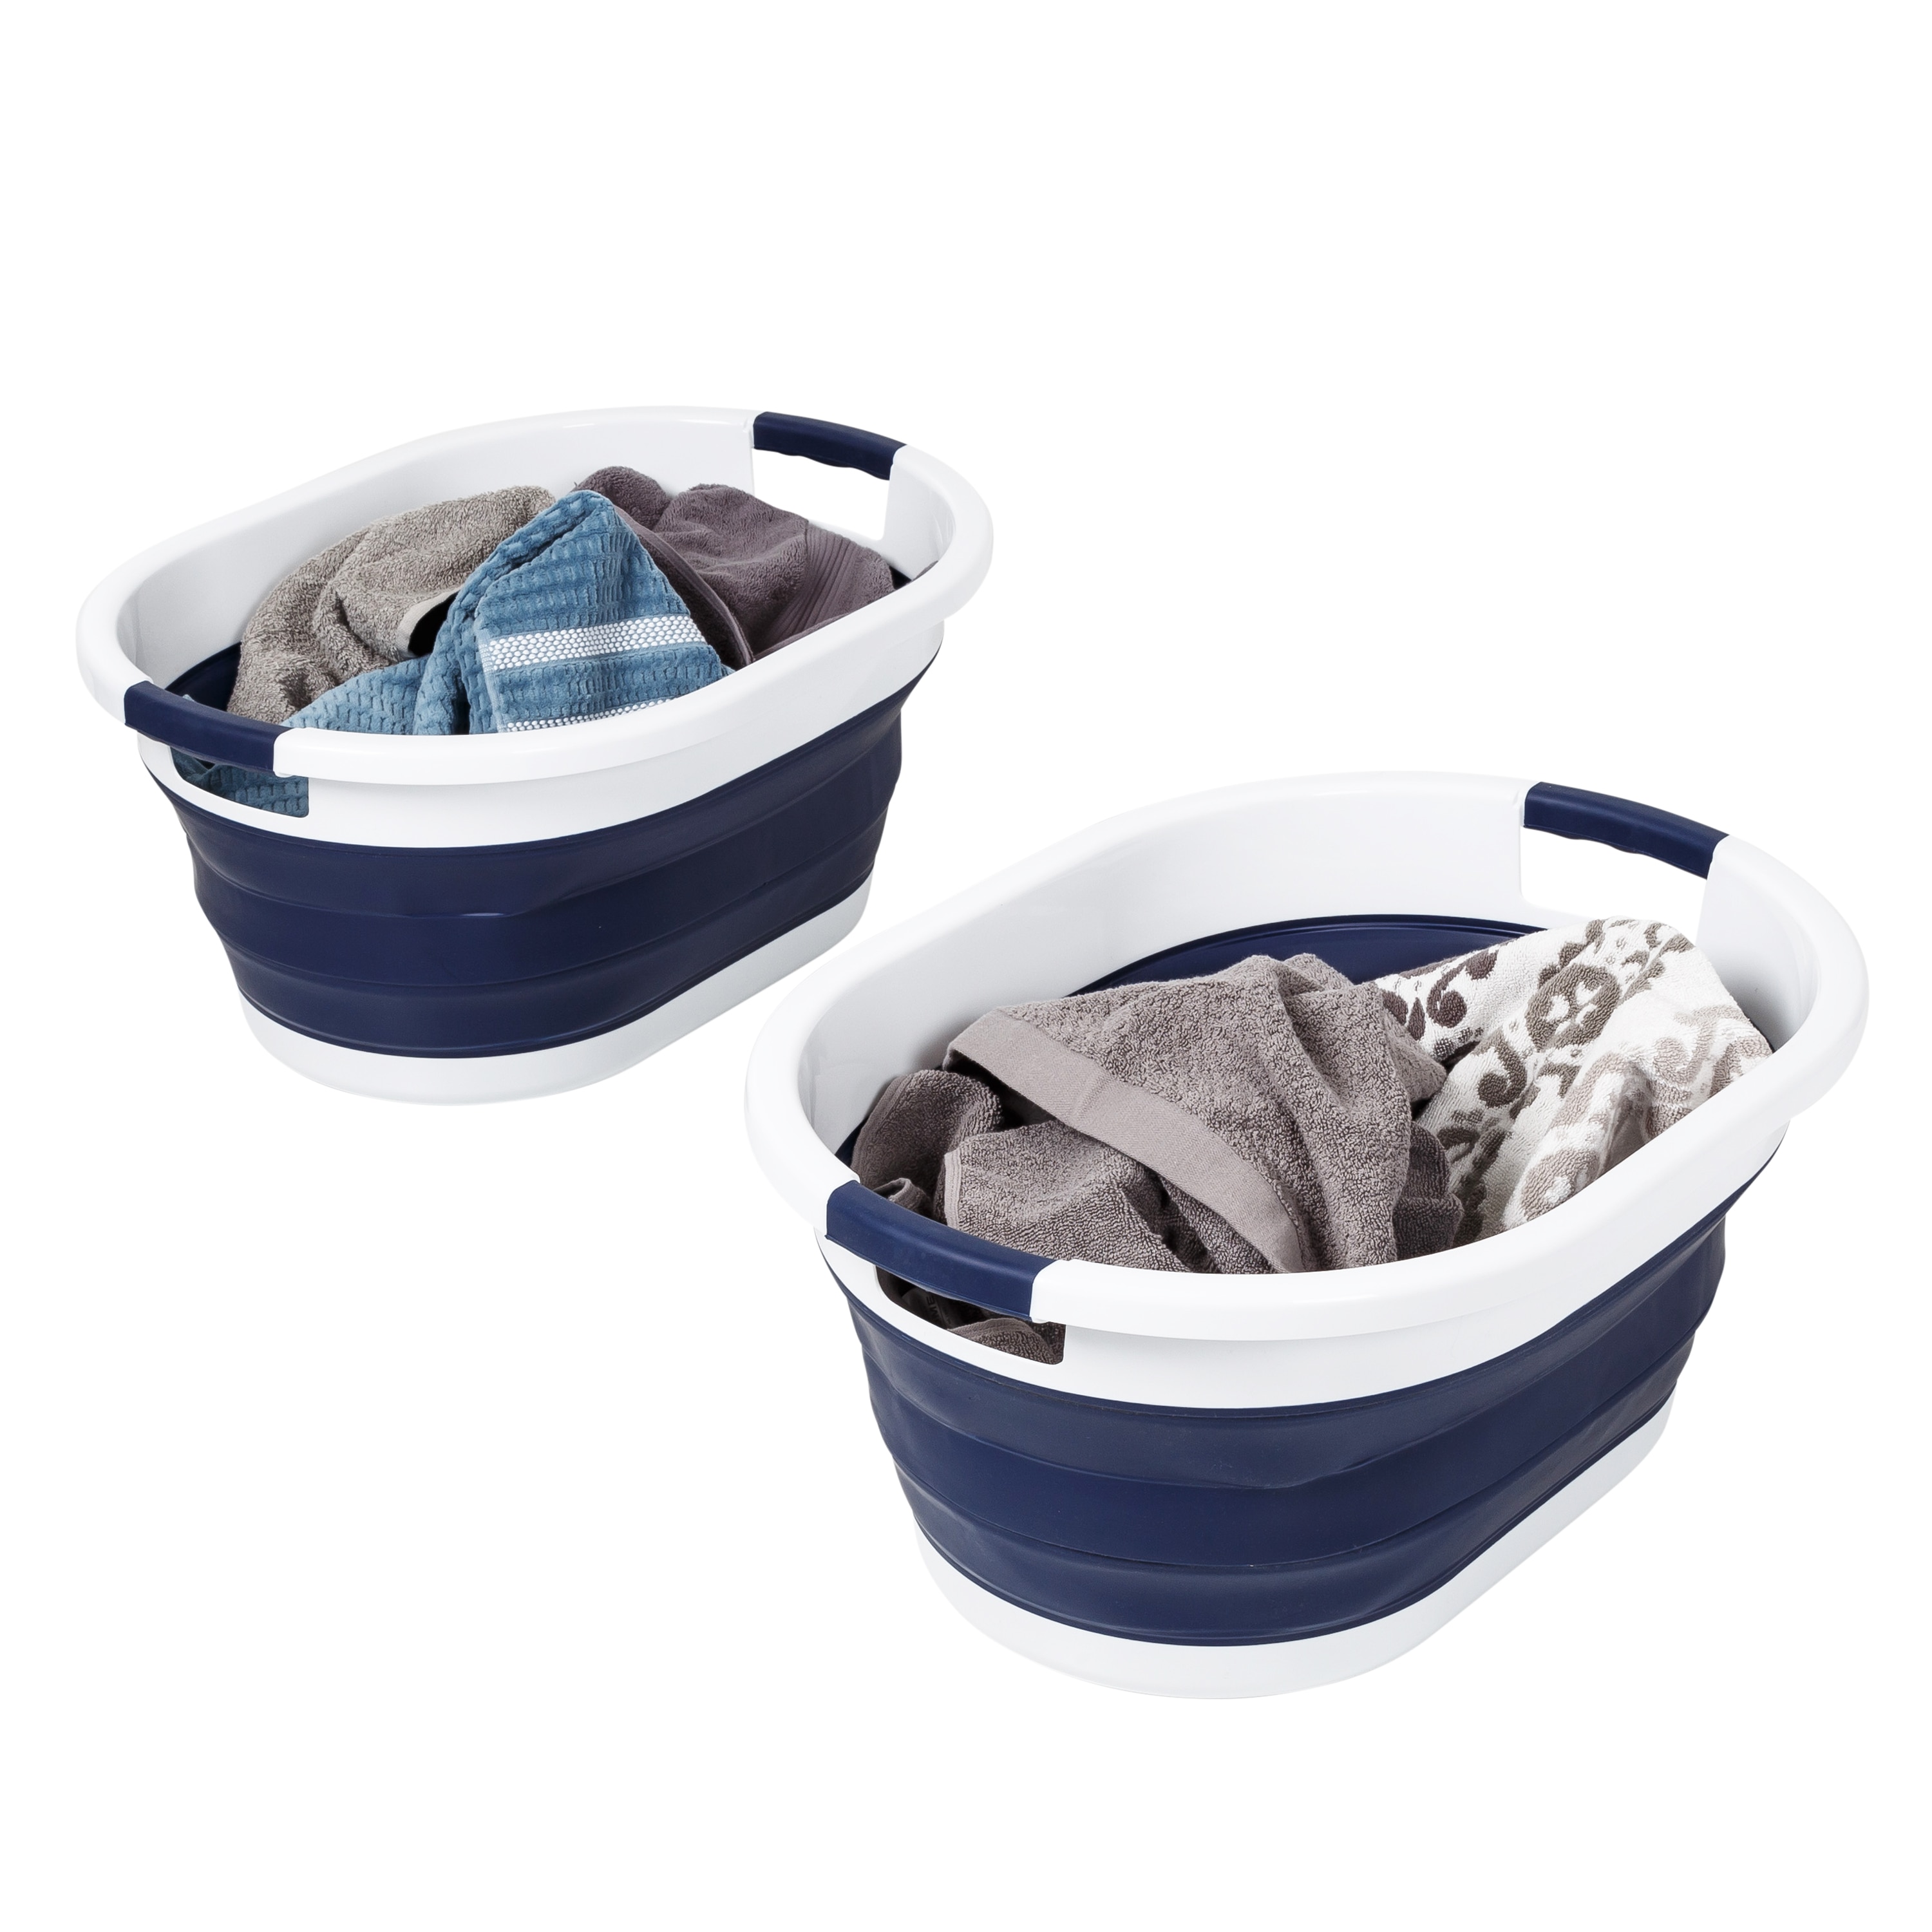 Set of 2 Collapsible Rubber Laundry Baskets With Handles